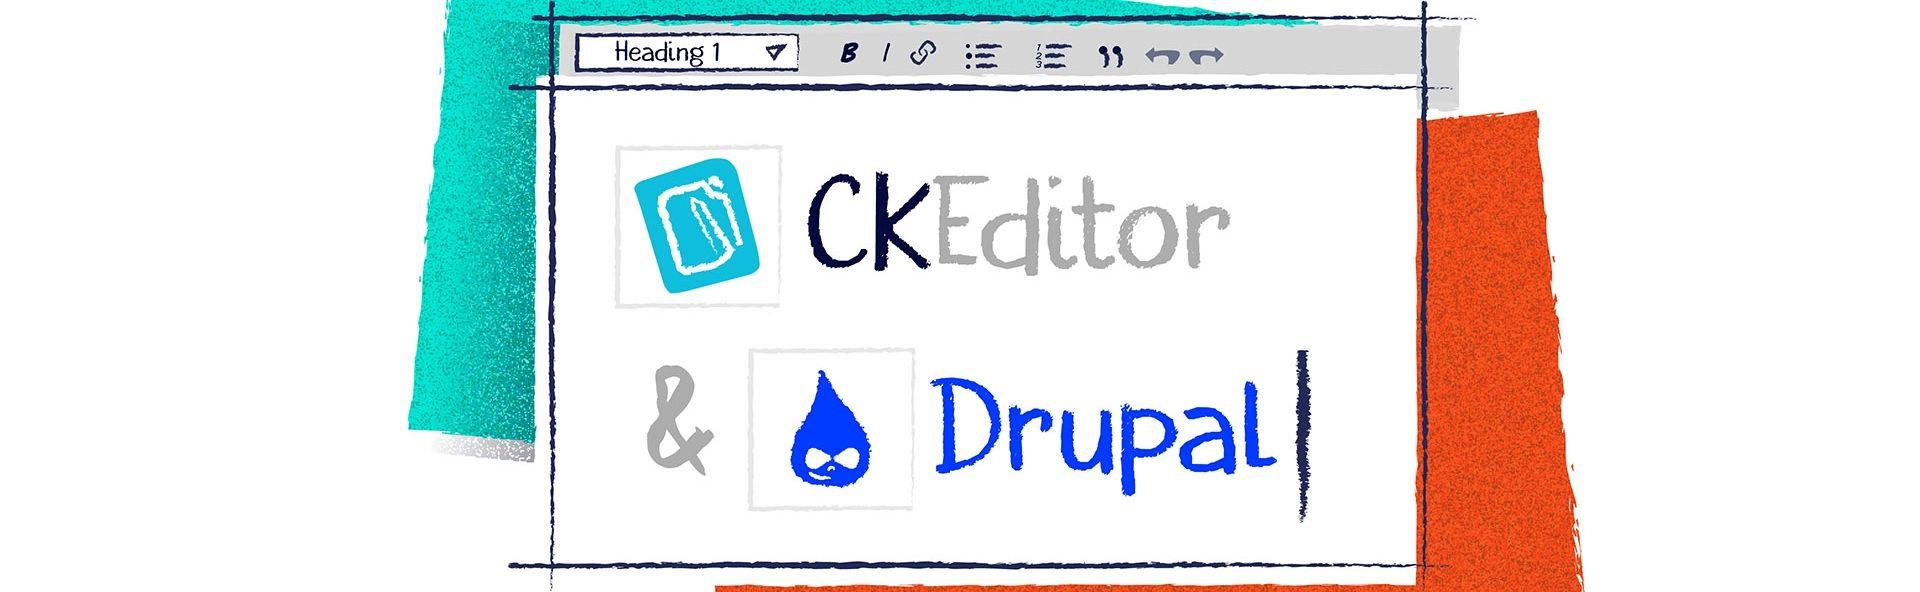 CKEditor Logo - How to add new button (plugin) to CKEditor pt. II